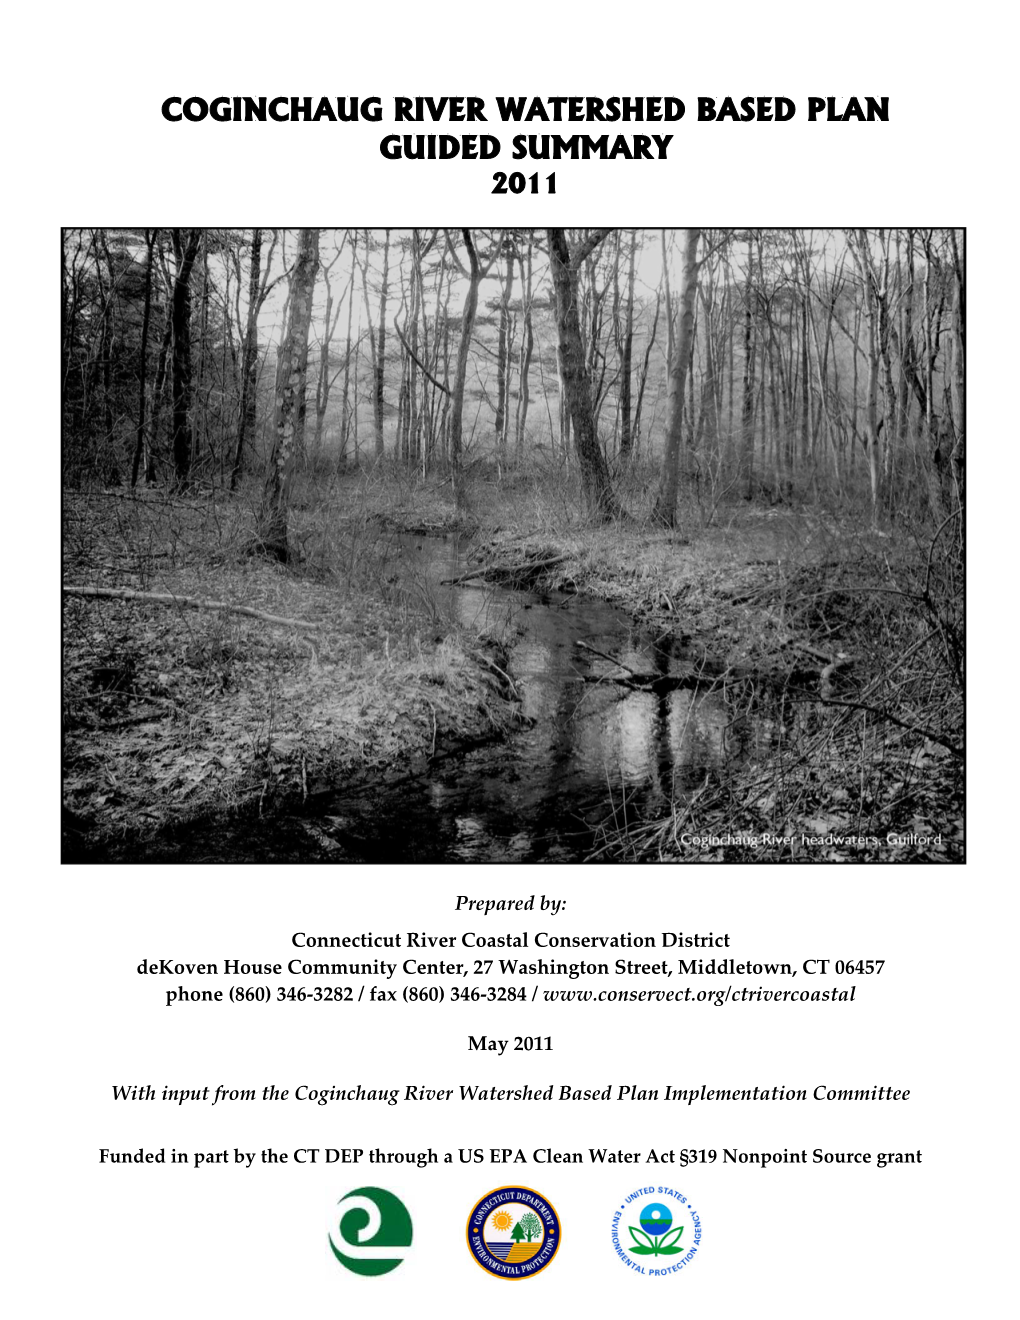 Coginchaug River Watershed Based Plan Guided Summary 2011